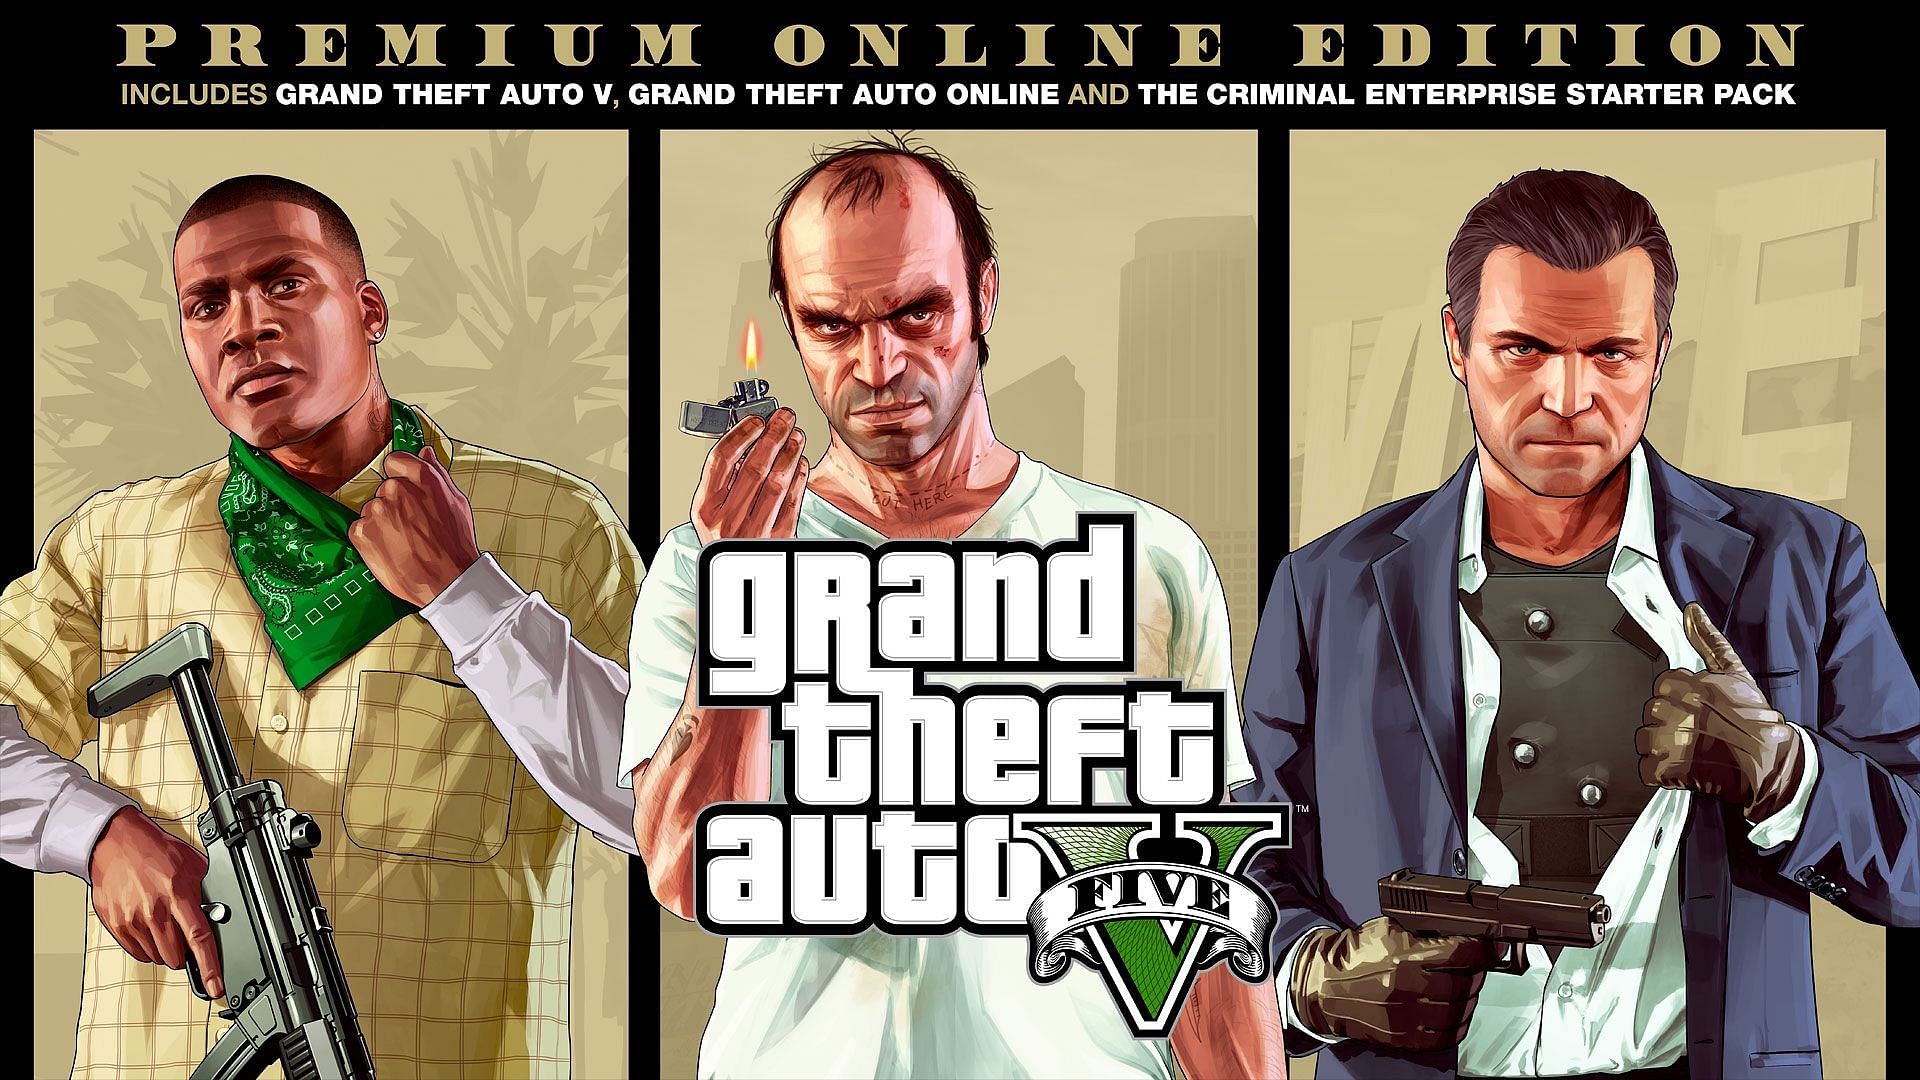 GTA 5 DOWNLOAD FOR PC/LAPTOP [100% WORKING] — Steemit